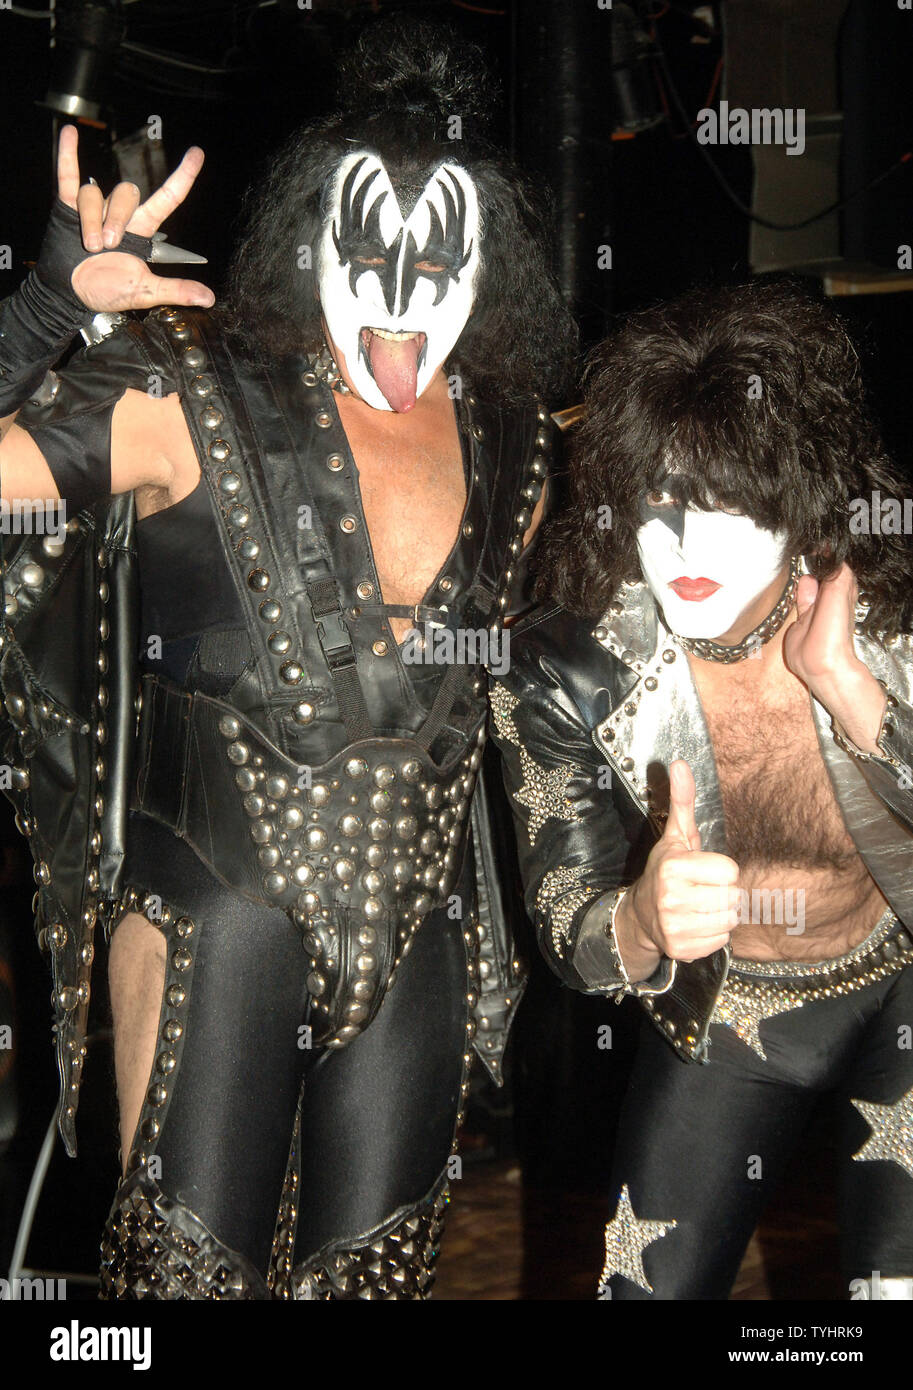 Gene Simmons and Paul Stanley (right) the lead front men for the band KISS  appear in full costume at a New York press conference to promo their  special 2 dvd box set